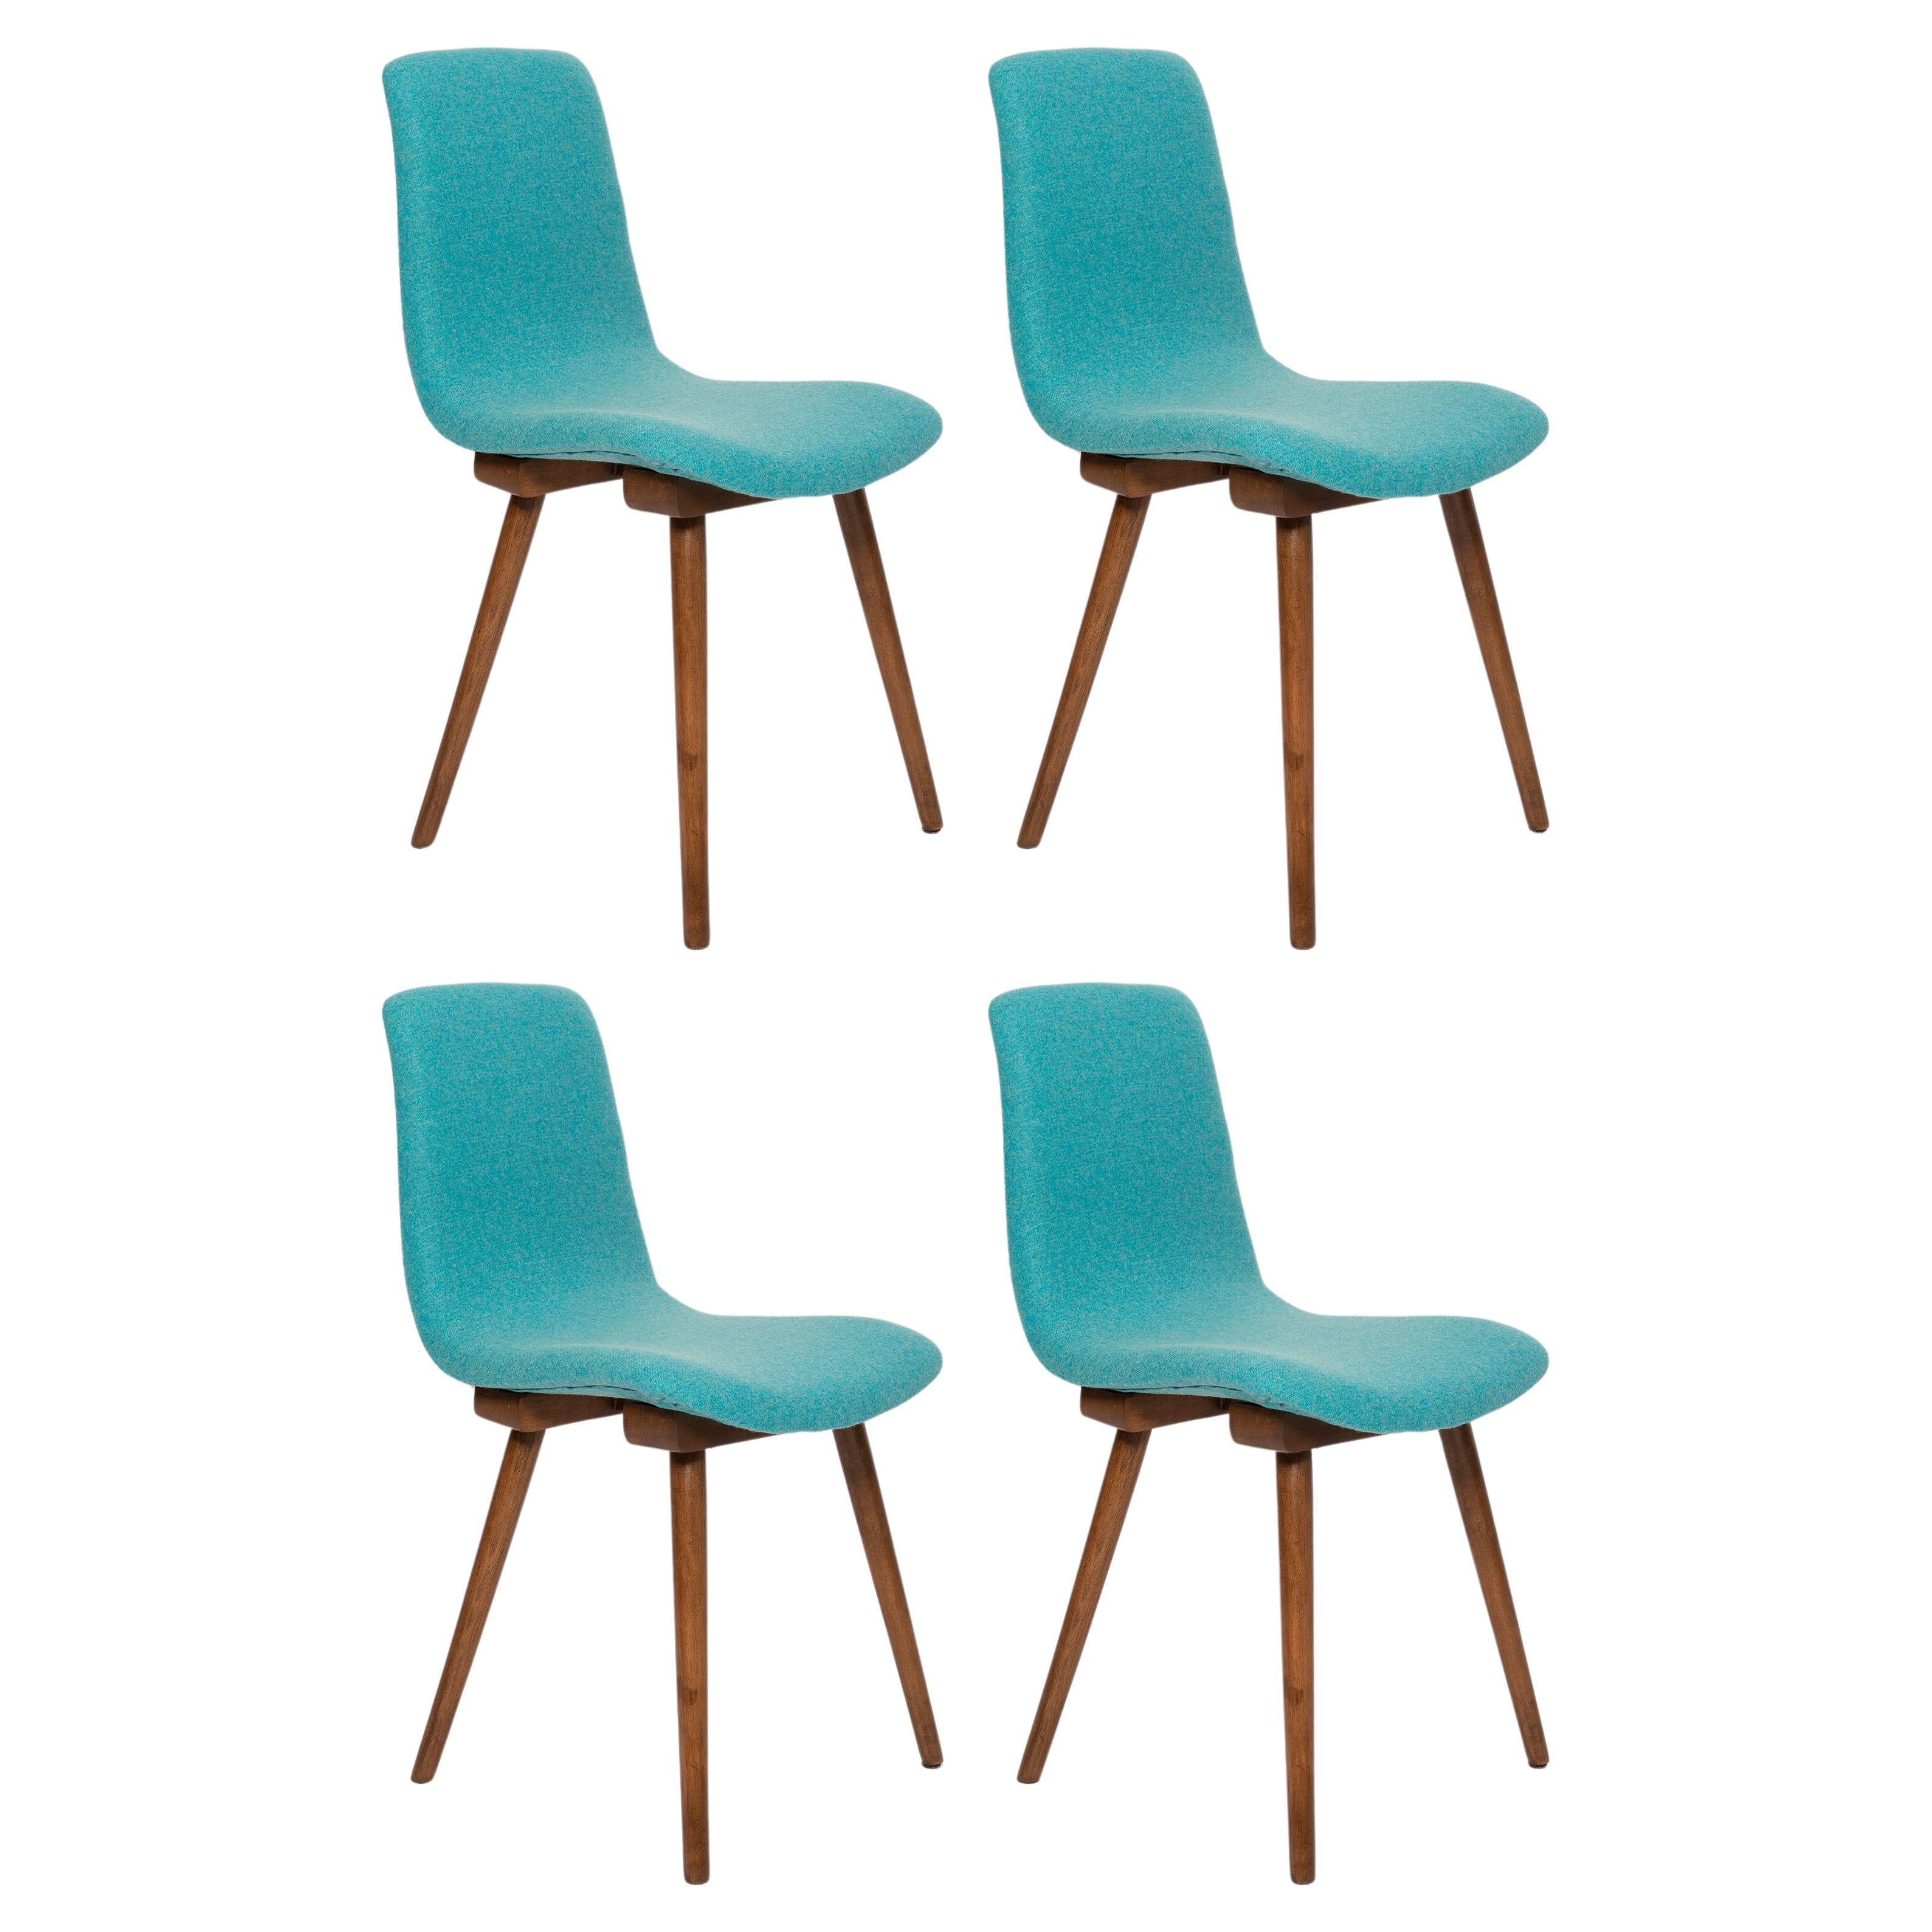 Set of Four Mid Century Acqua Wool Vintage Chairs, Fameg Factory, Europe, 1960s For Sale